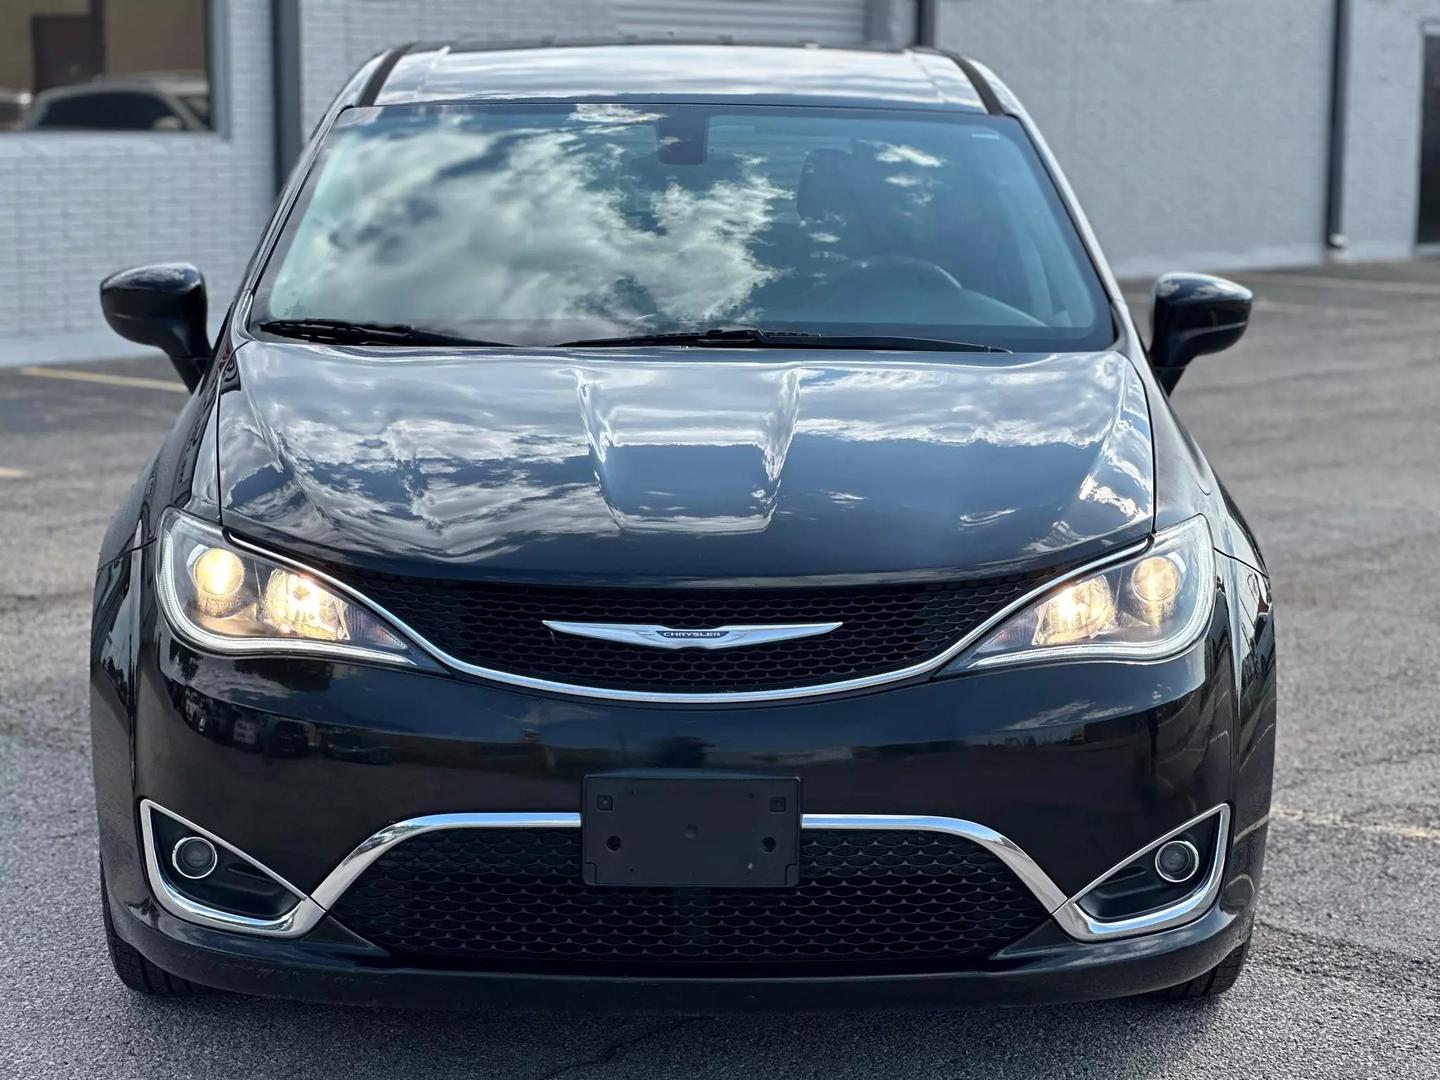 2017 Chrysler Pacifica - Image 11